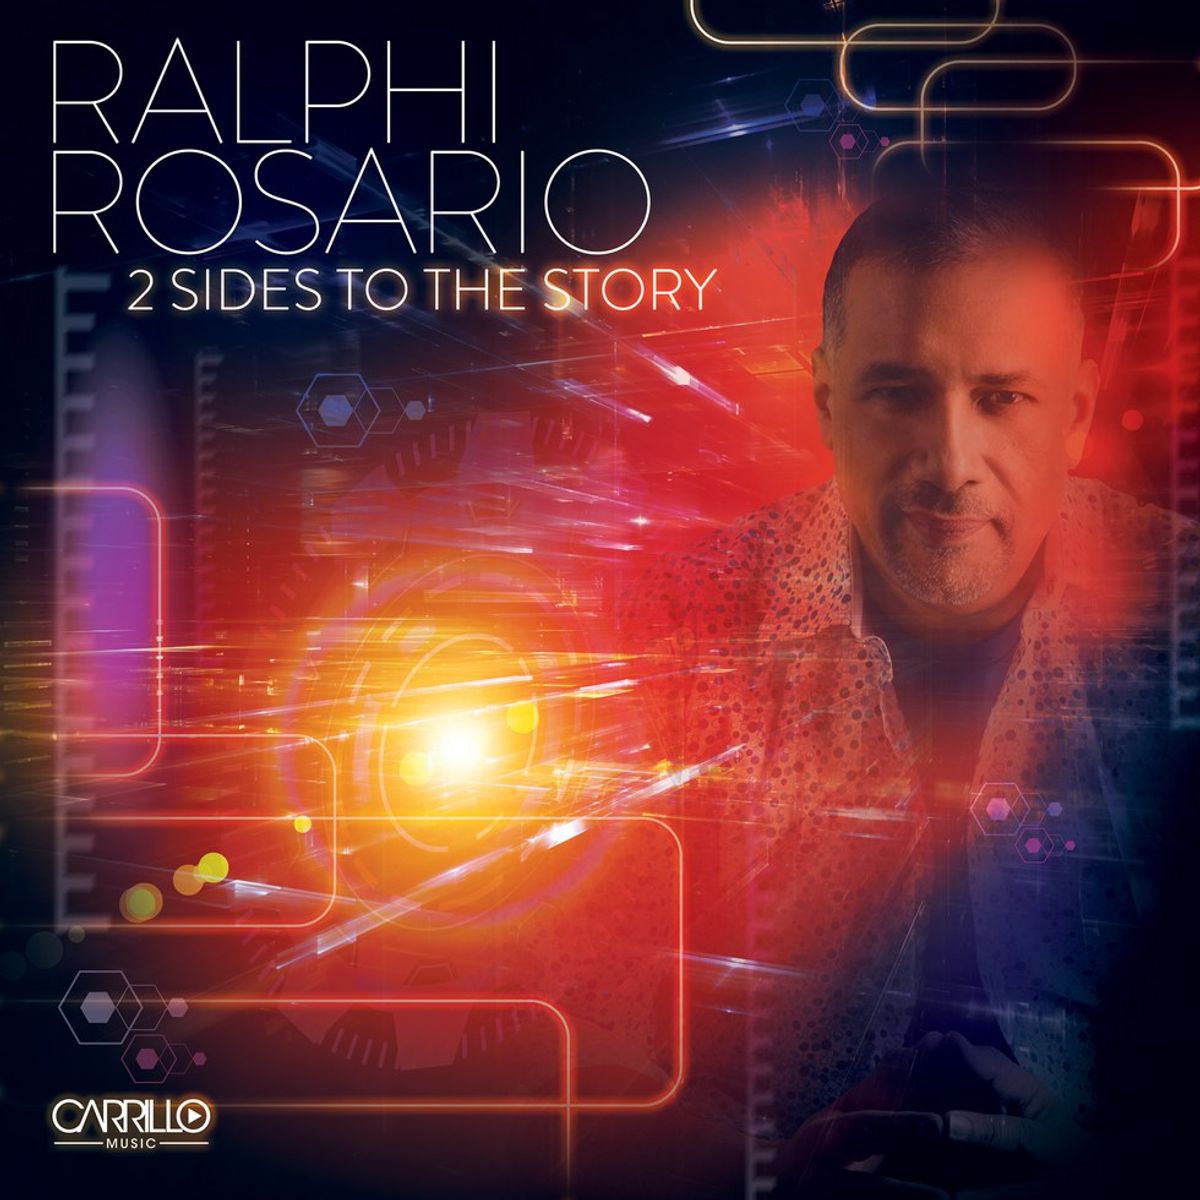 House Music Maestro and Legend Ralphi Rosario Takes Us Deep into the Jungle and Beyond on Fantastic “2 Sides to the Story” Release